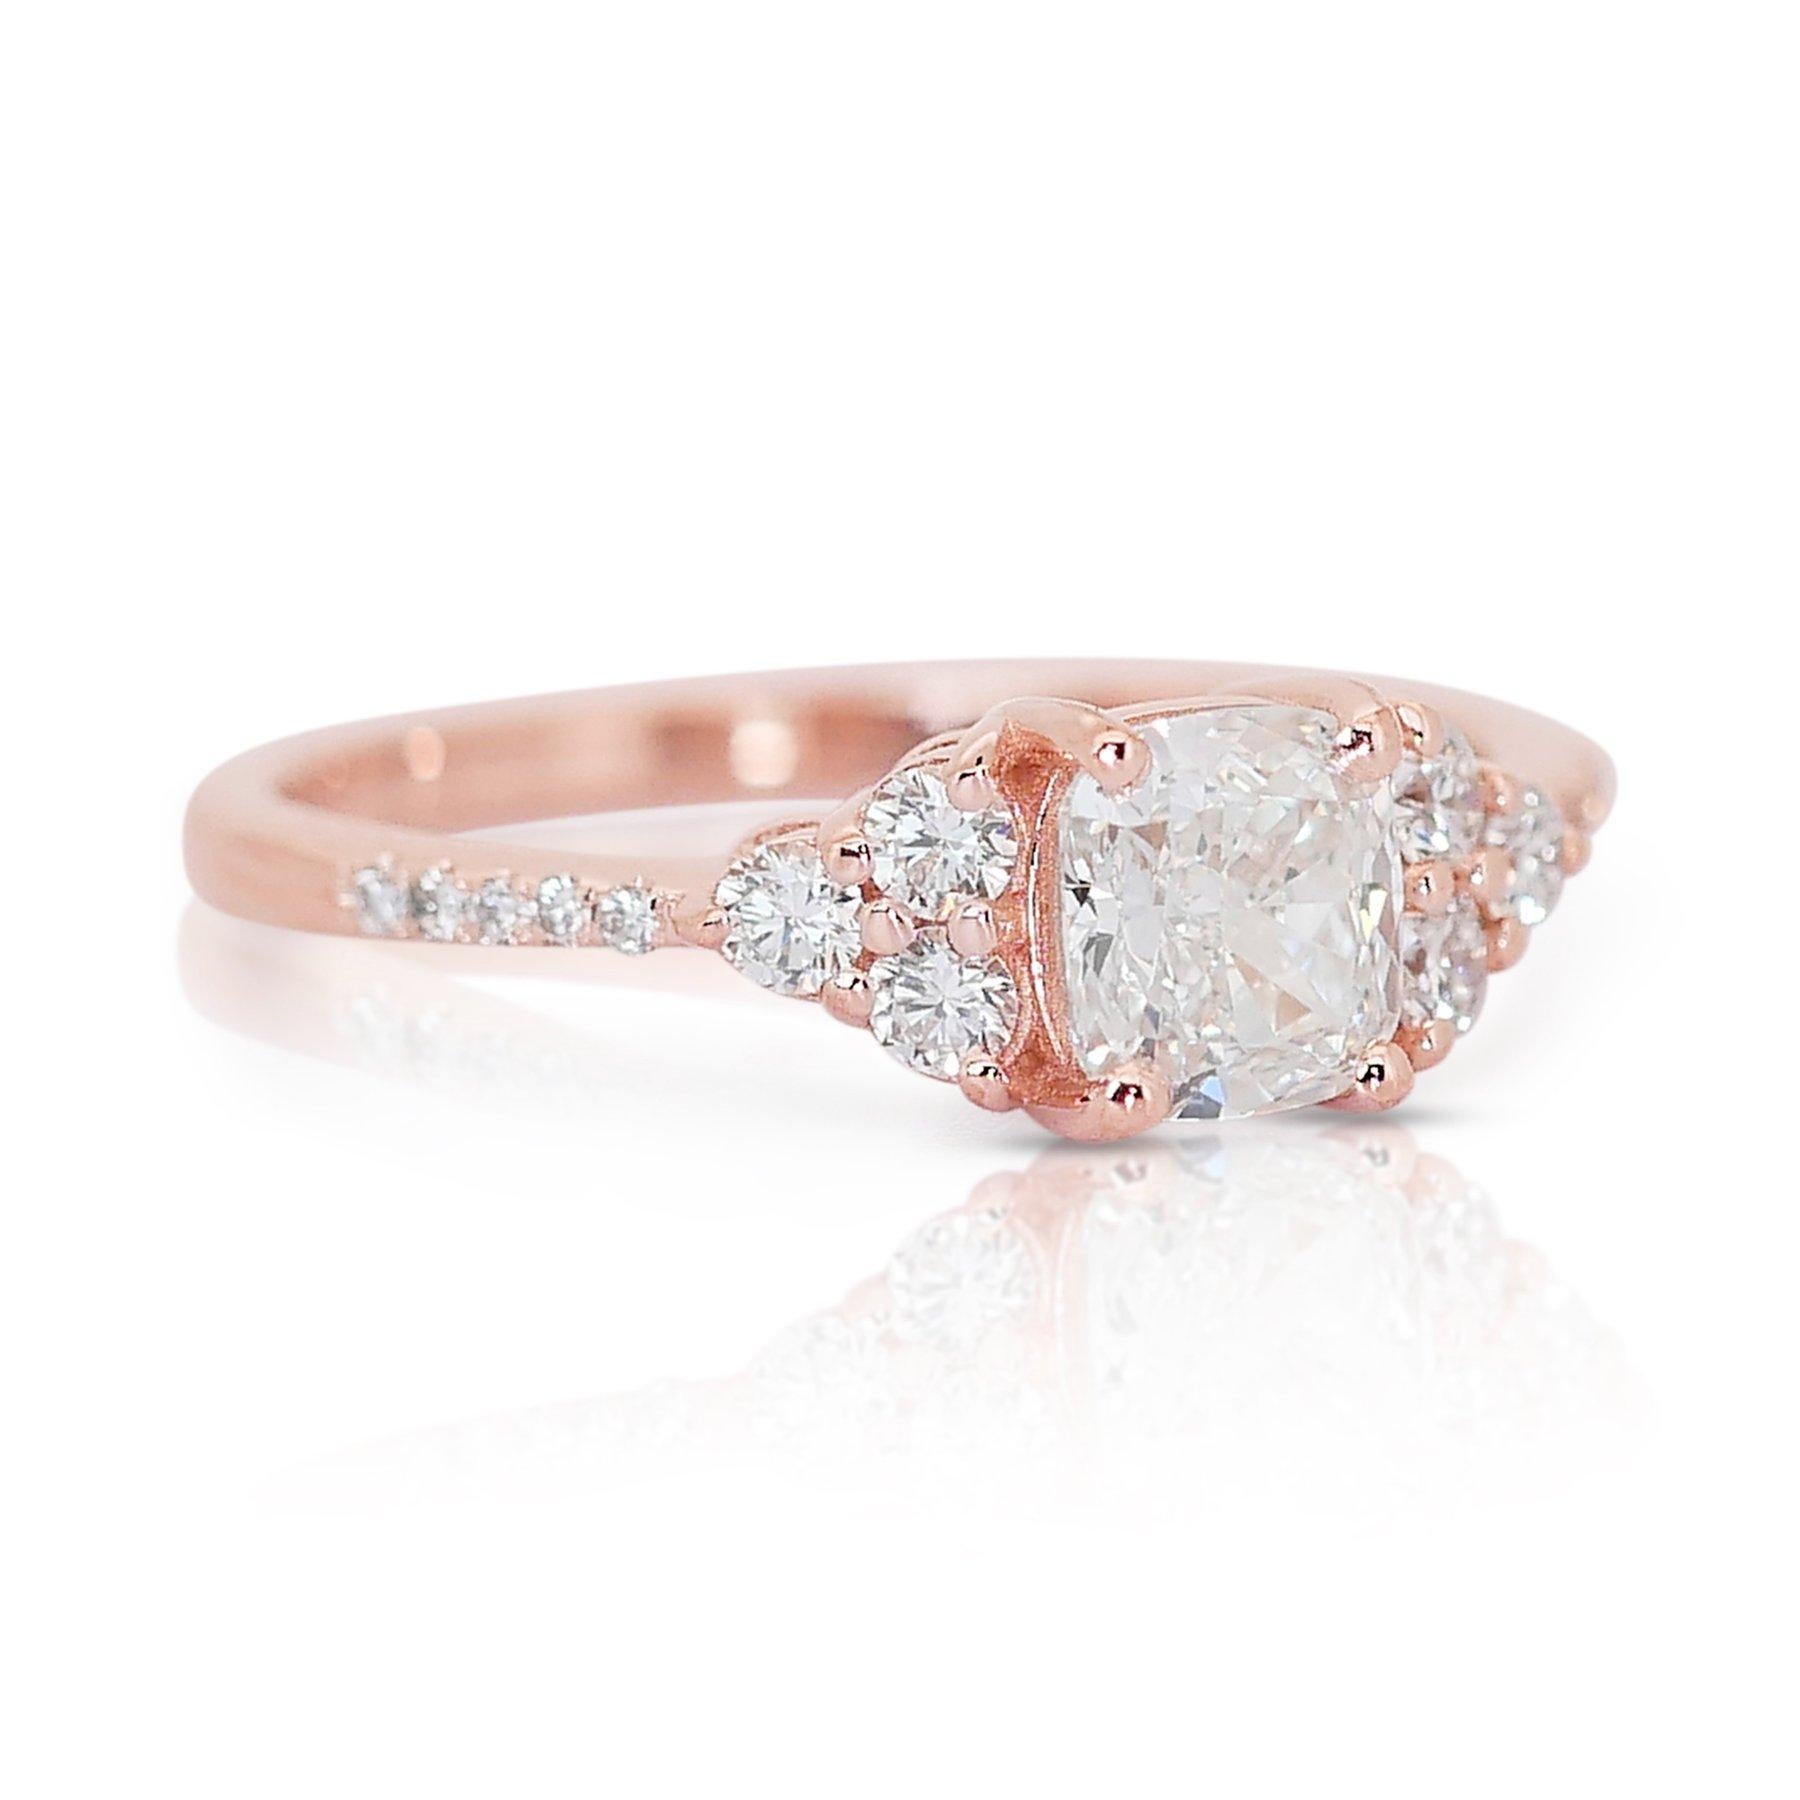 Enchanting 1.29ct Diamond Pave Ring in 18k Rose Gold - GIA Certified

Embrace the epitome of elegance with our diamond pave ring, exquisitely crafted in luxurious 18k rose gold. The centerpiece of this mesmerizing ring is a dazzling cushion-cut